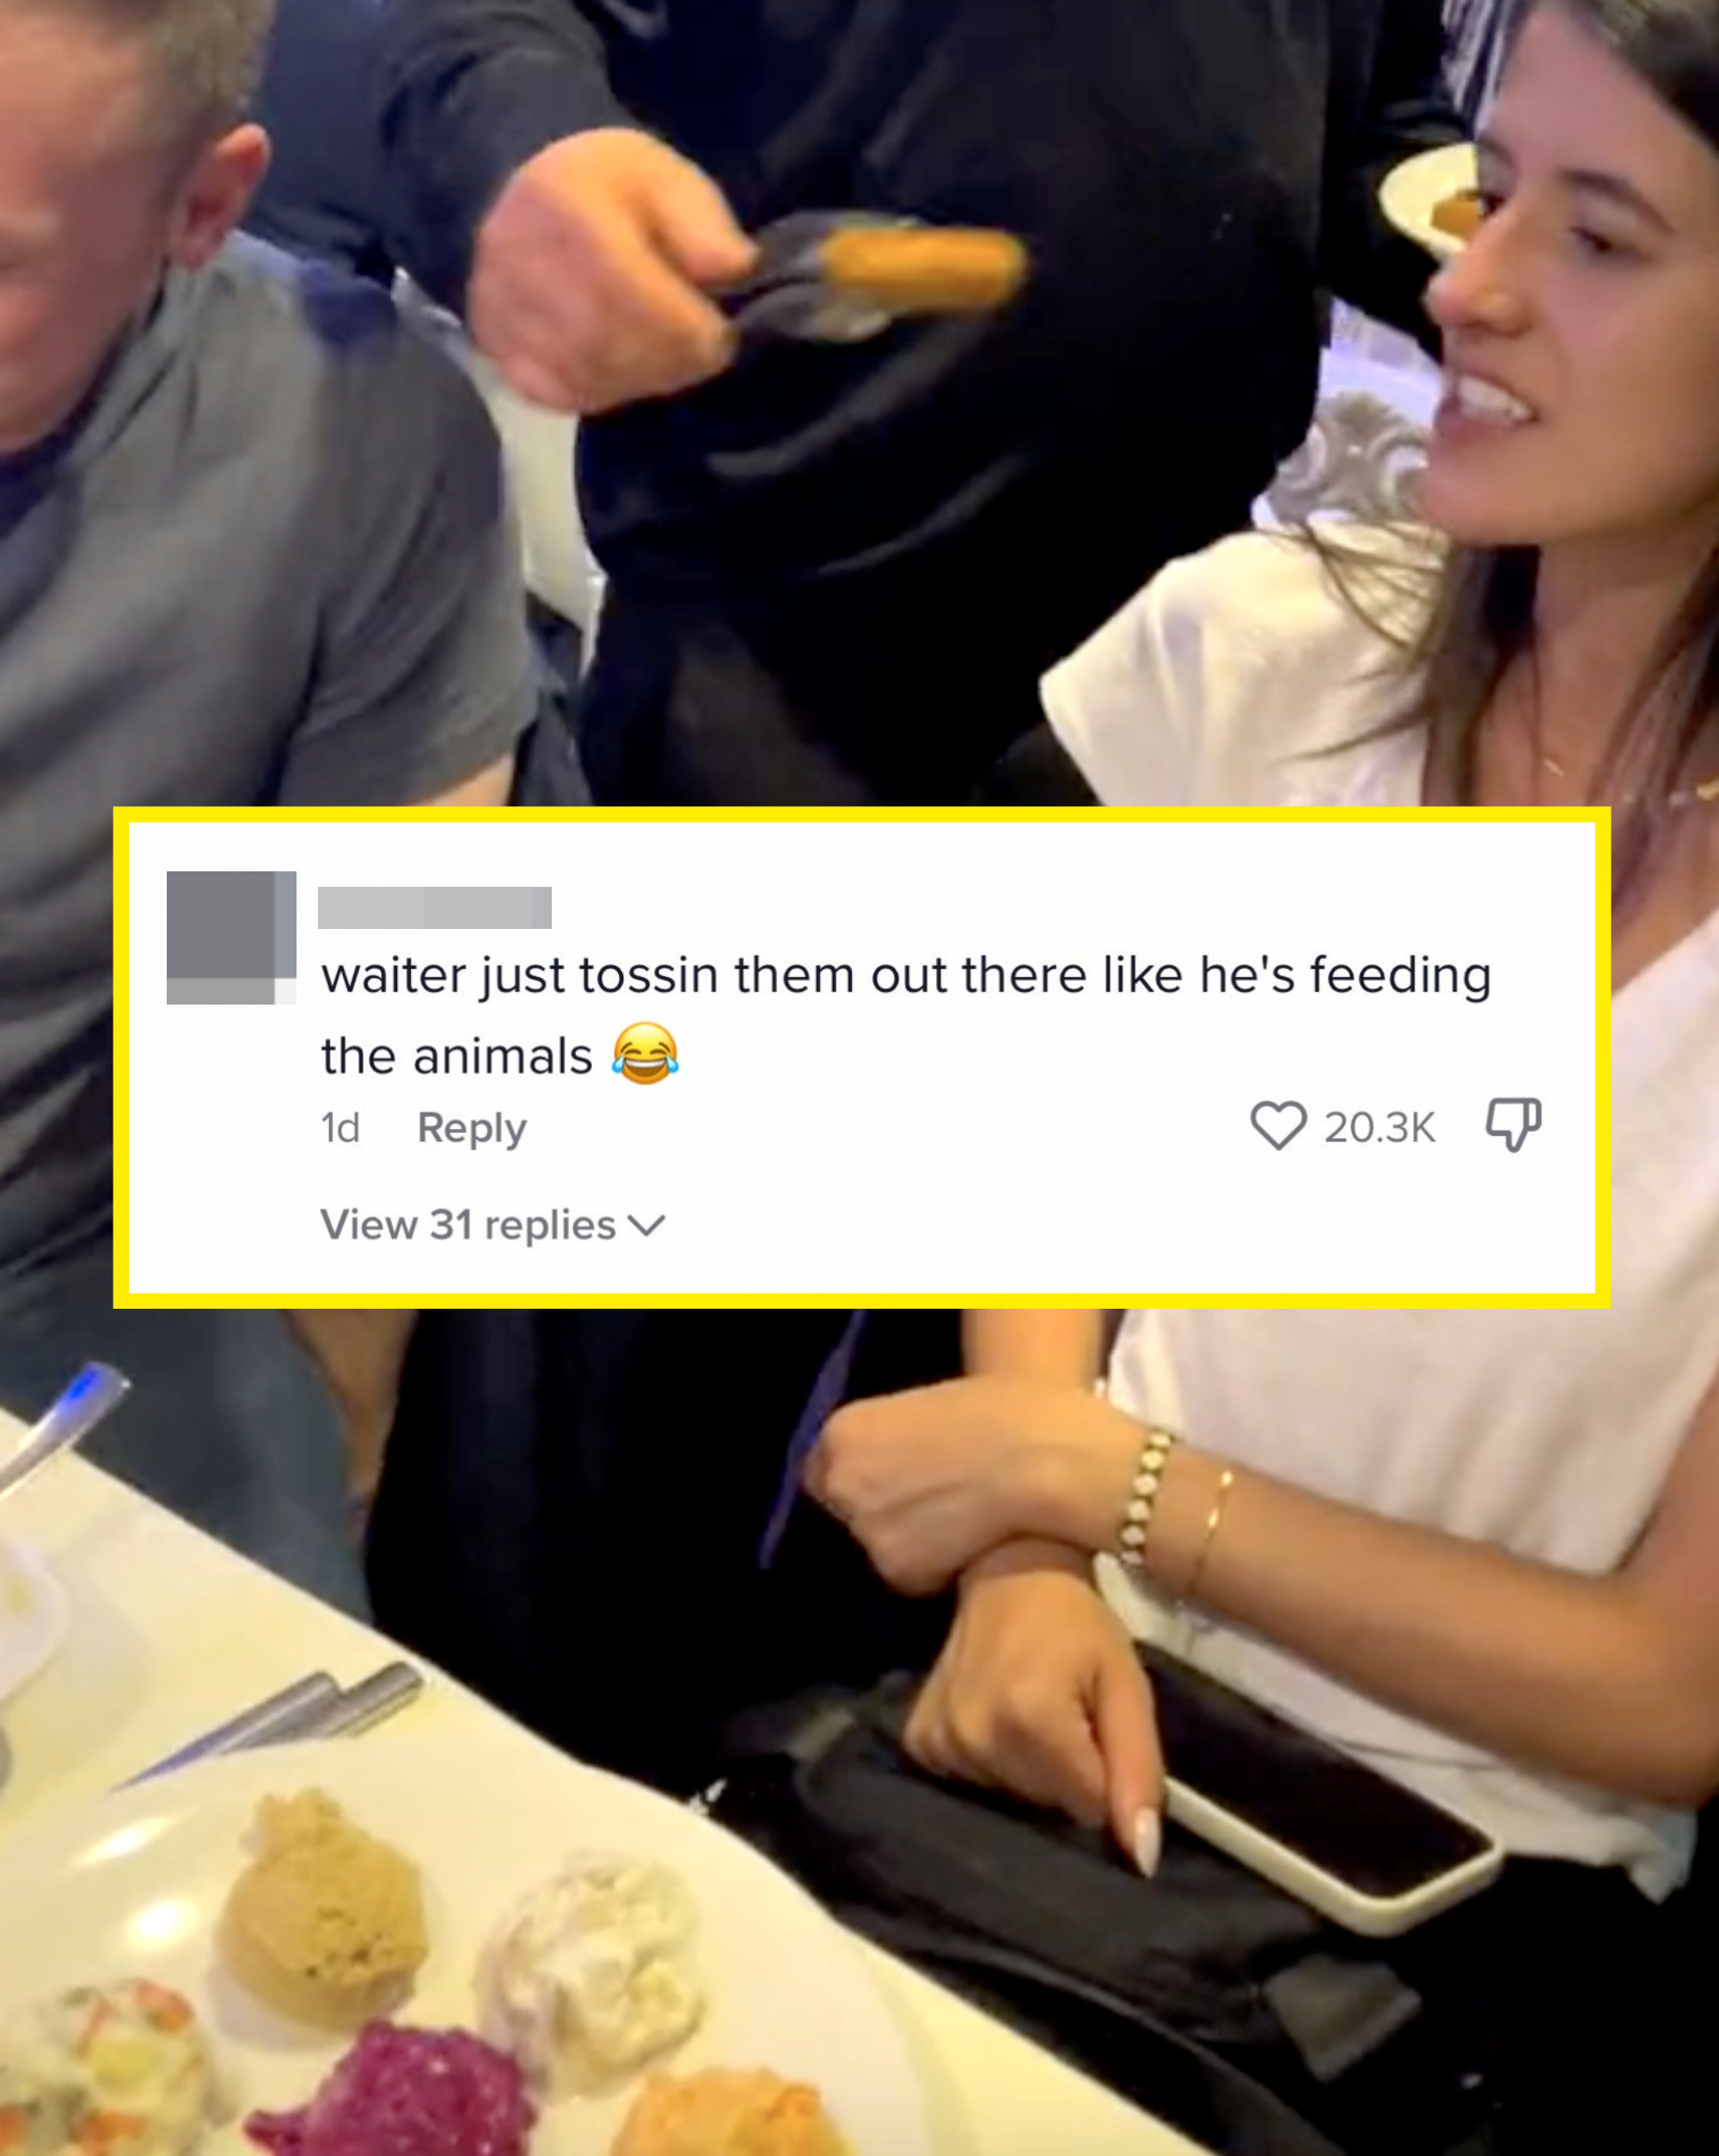 Comment on Tiktok saying &quot;waiter just tossin them out there like he&#x27;s feeding the animals&quot; while waiter puts chicken nugget in front of diner